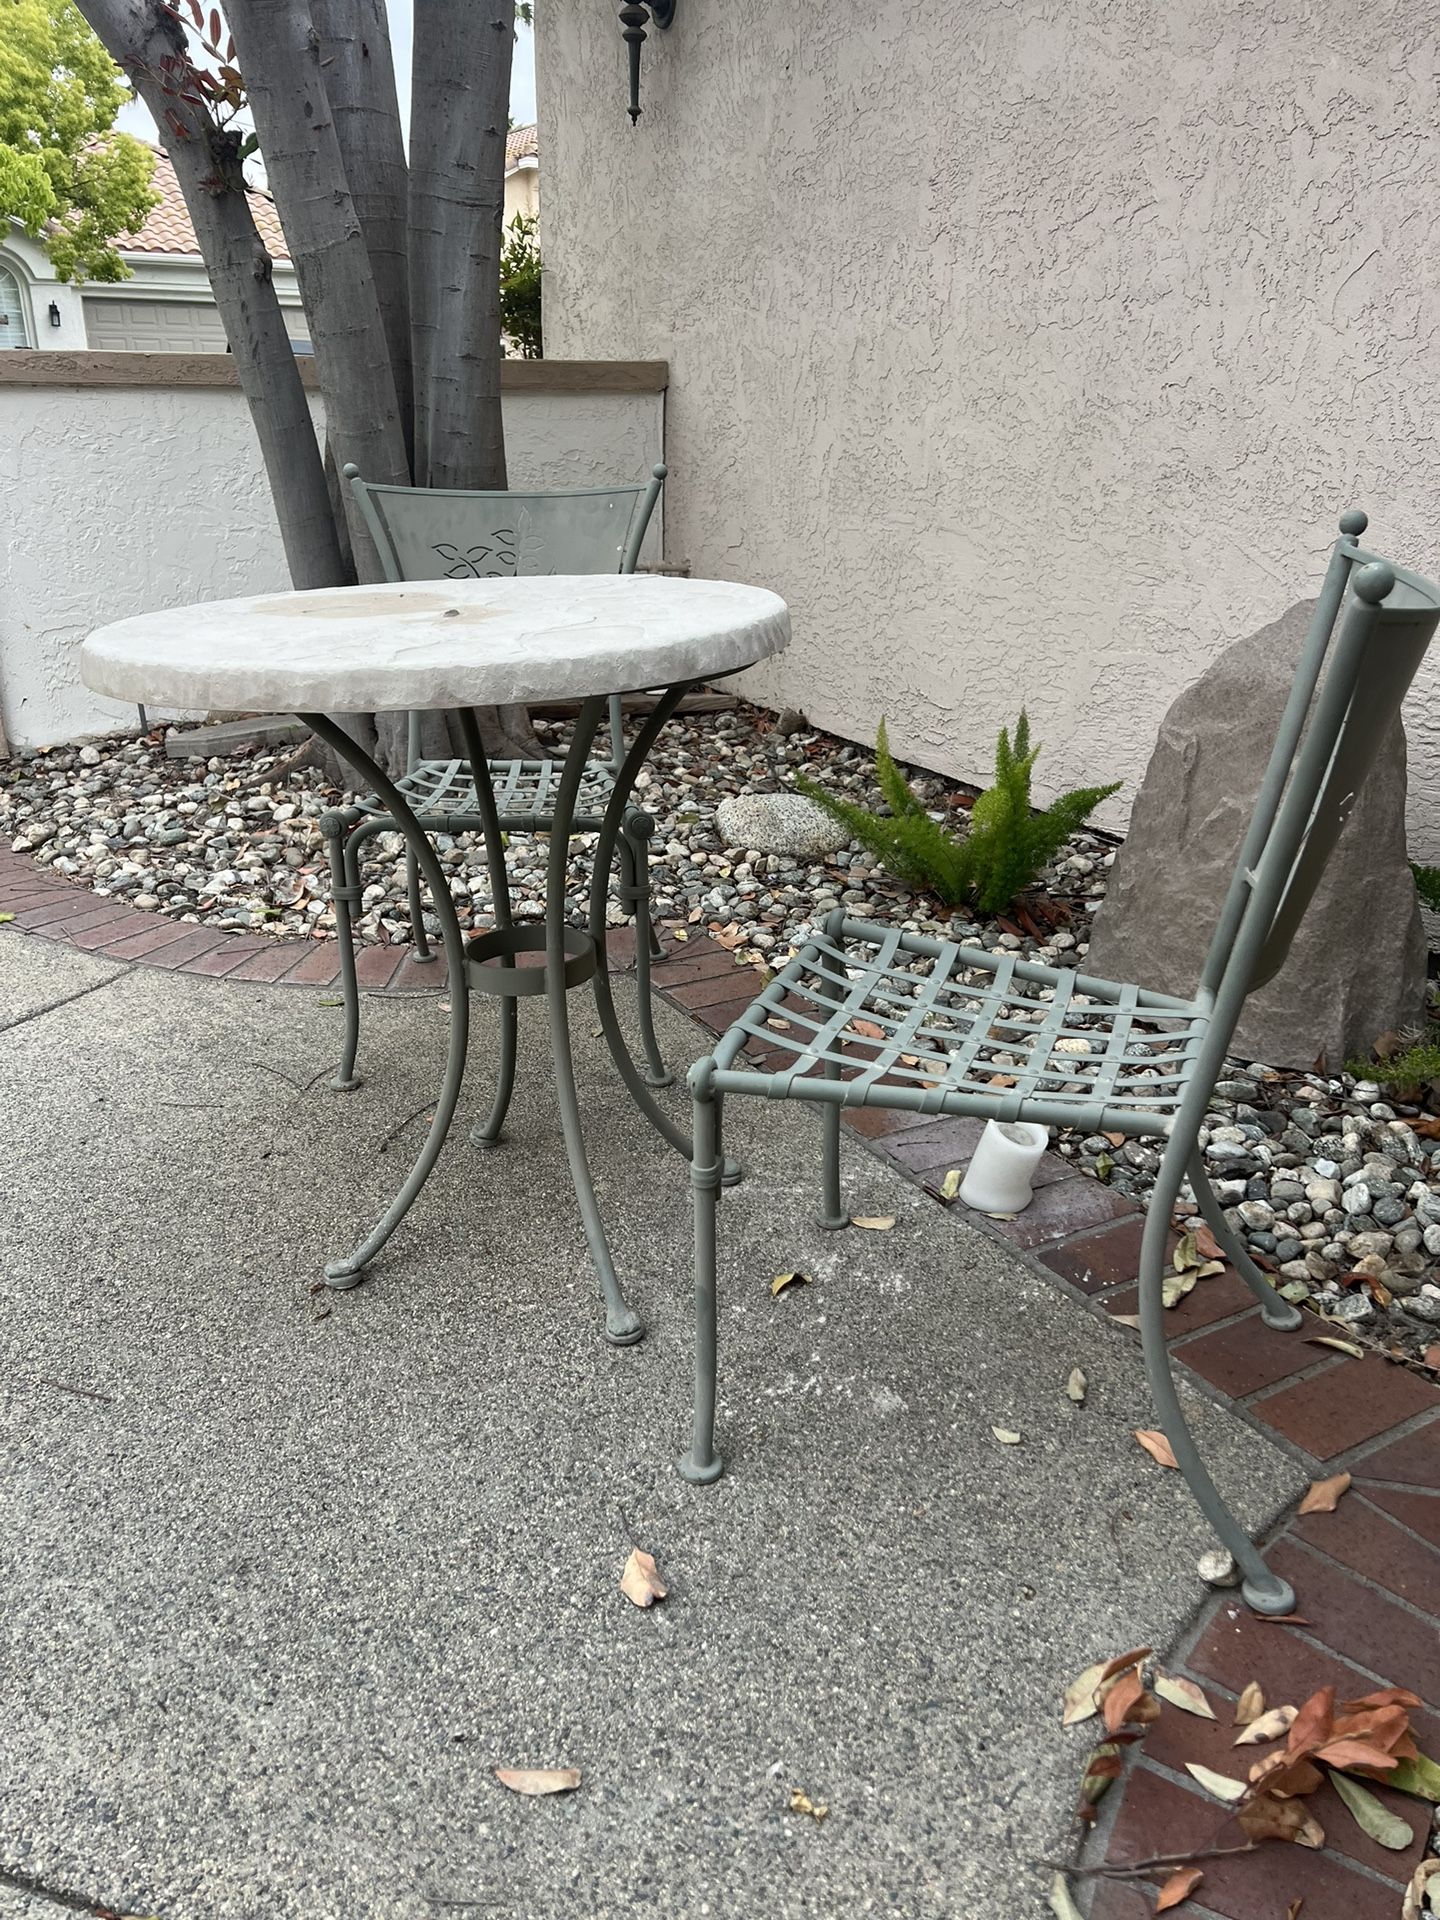 Cafe patio table